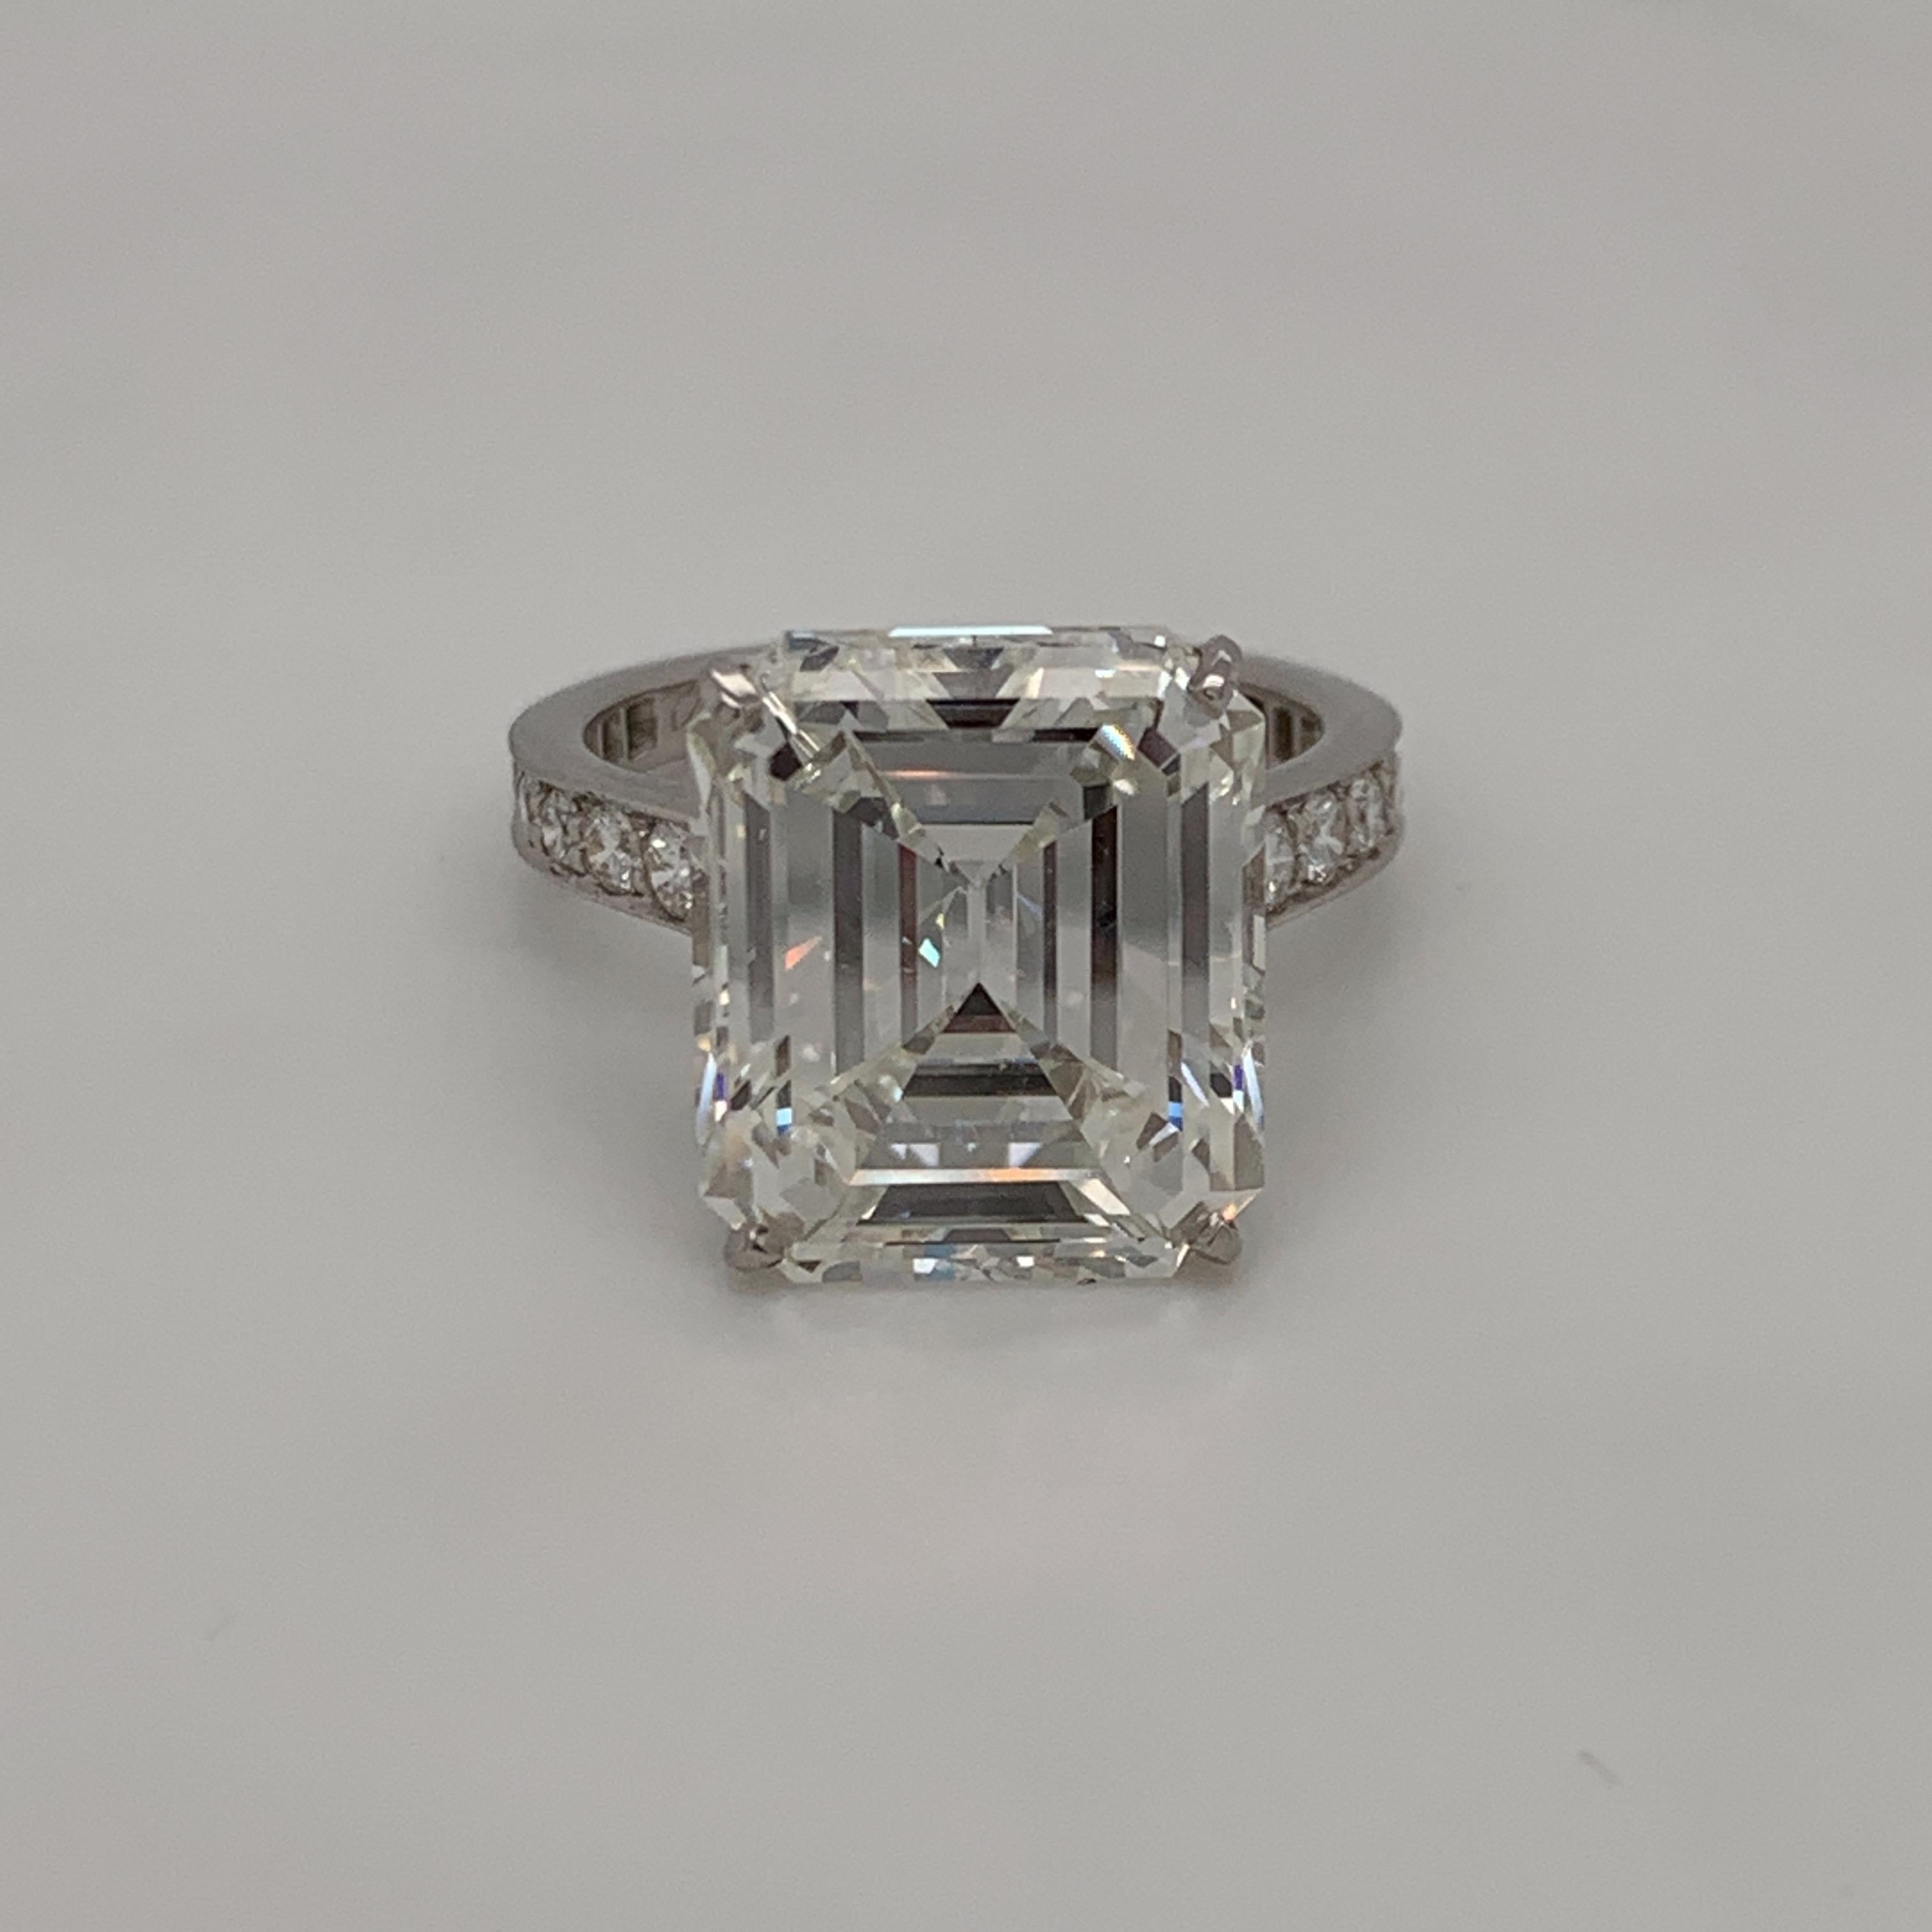 Leave it to Cartier to create one of the most beautiful rings.
This ring features an incredible GIA certified 10.29 carat emerald cut diamond. I color VS1 clarity.
The diamond is of beautiful make and is as full of life and luster as a gemstone can